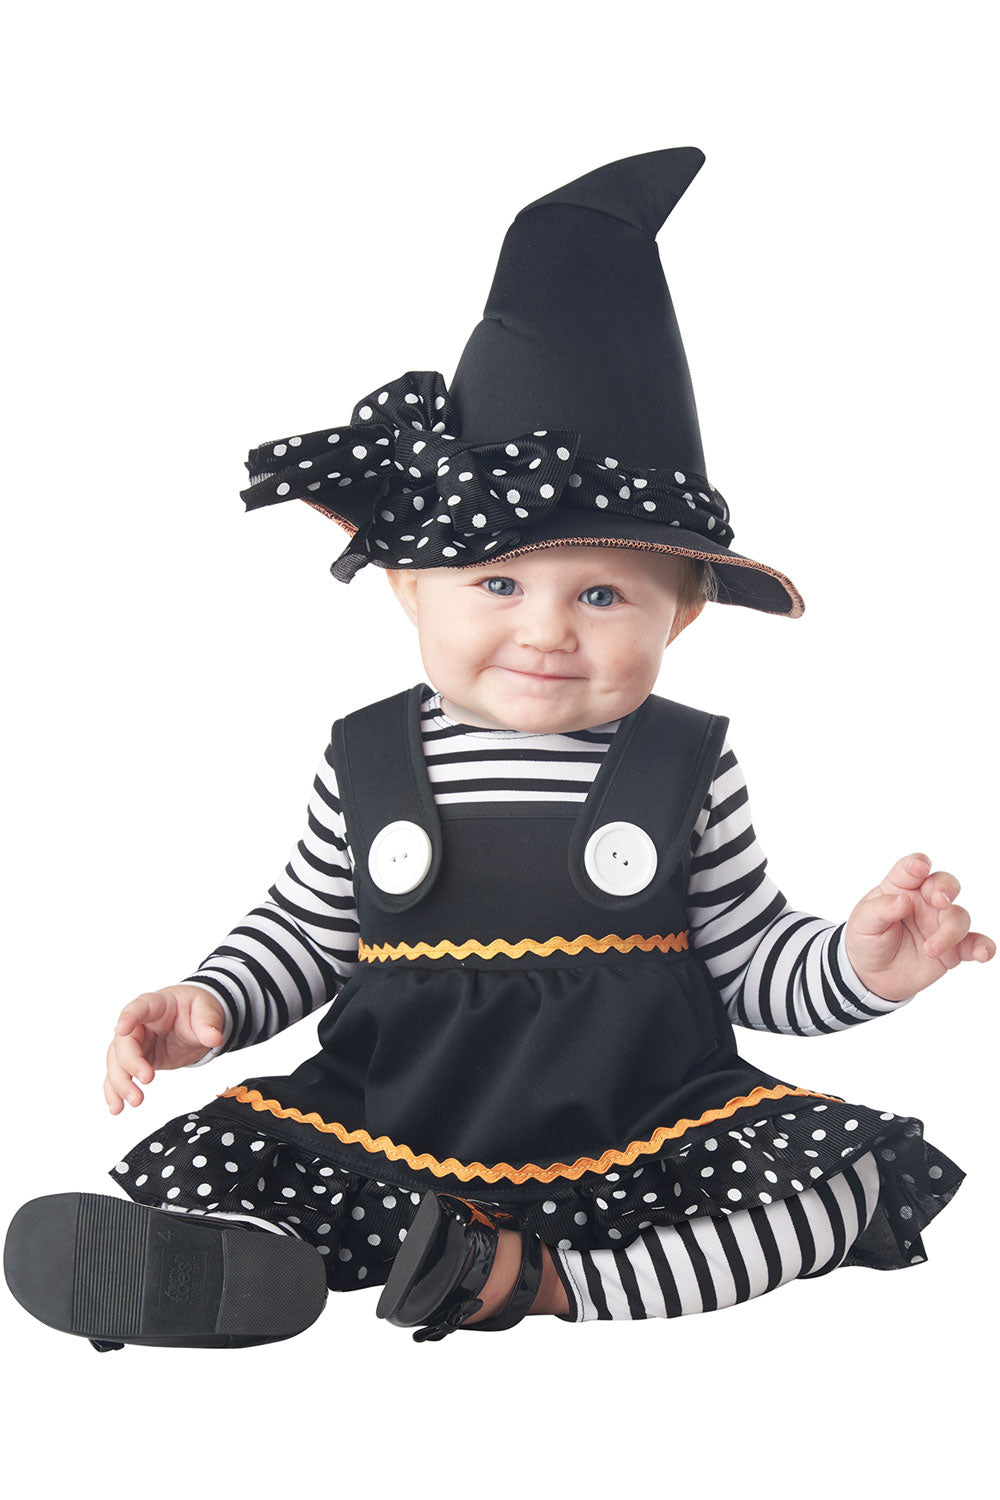 CRAFTY LIL' WITCH/INFANT California Costume 10048